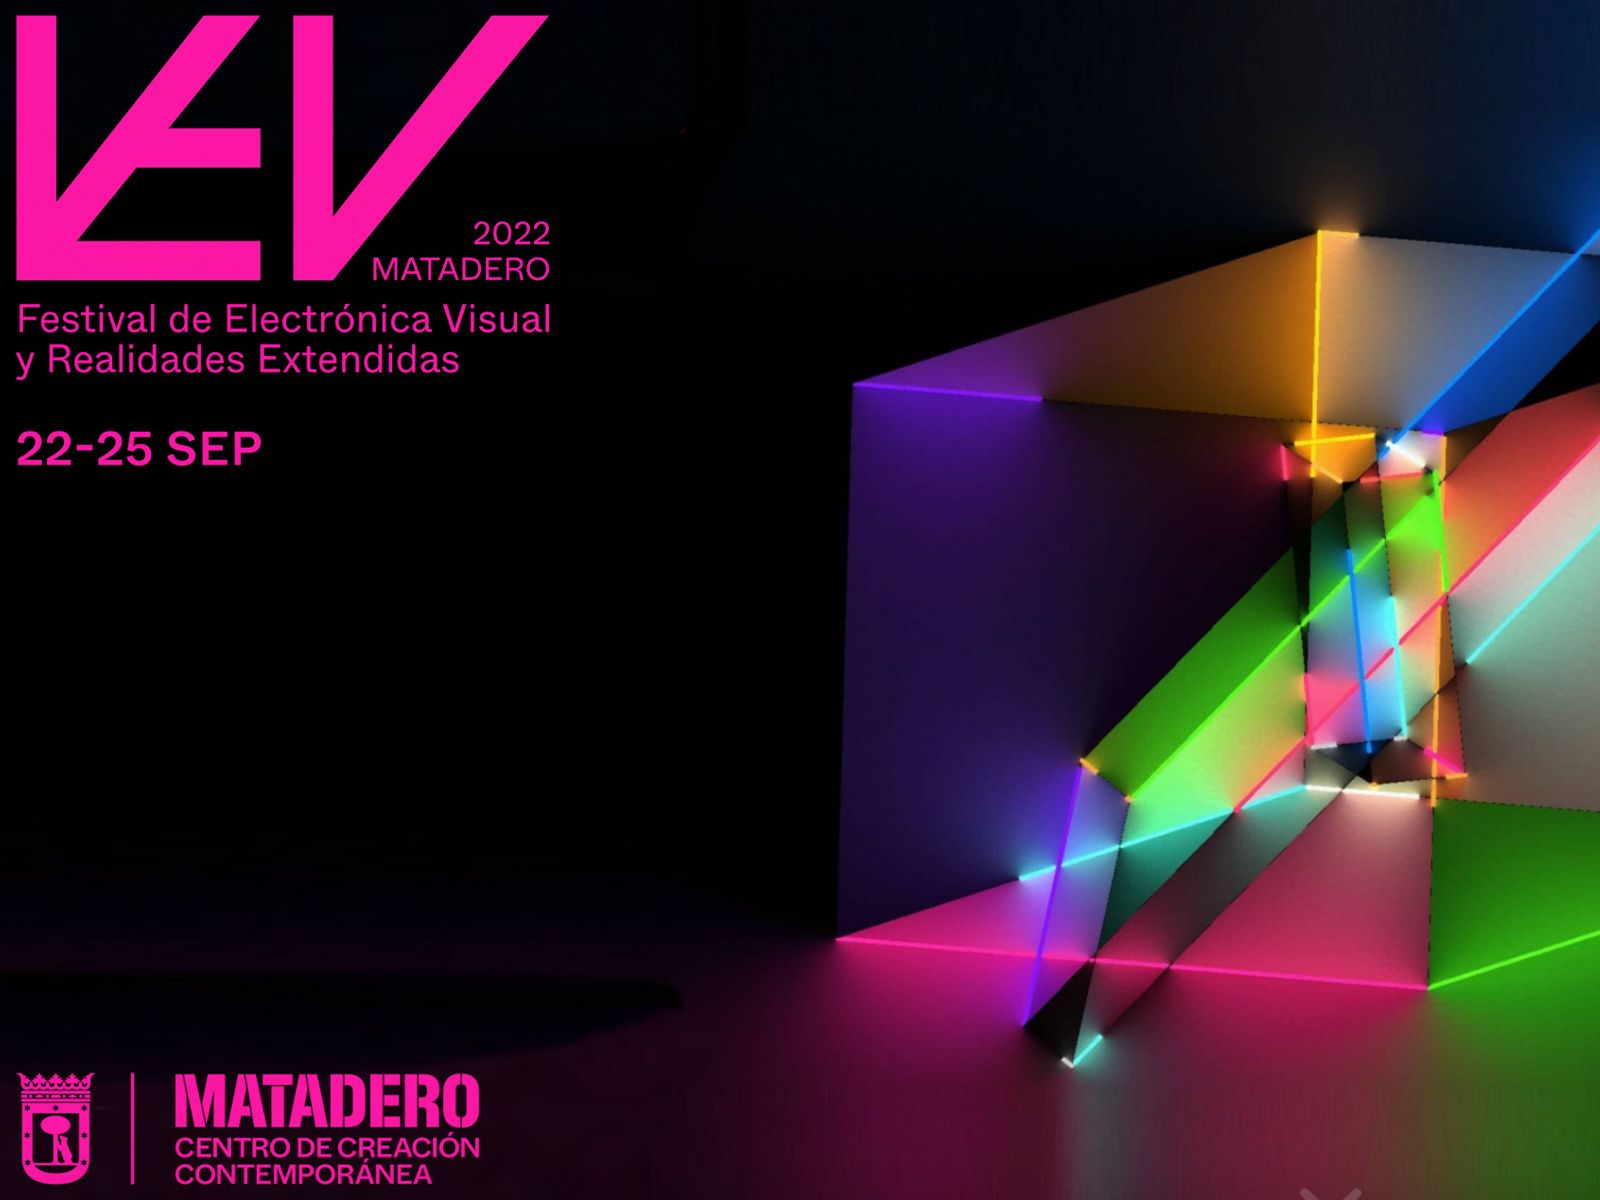 All the information about the fourth edition of L.E.V. Matadero